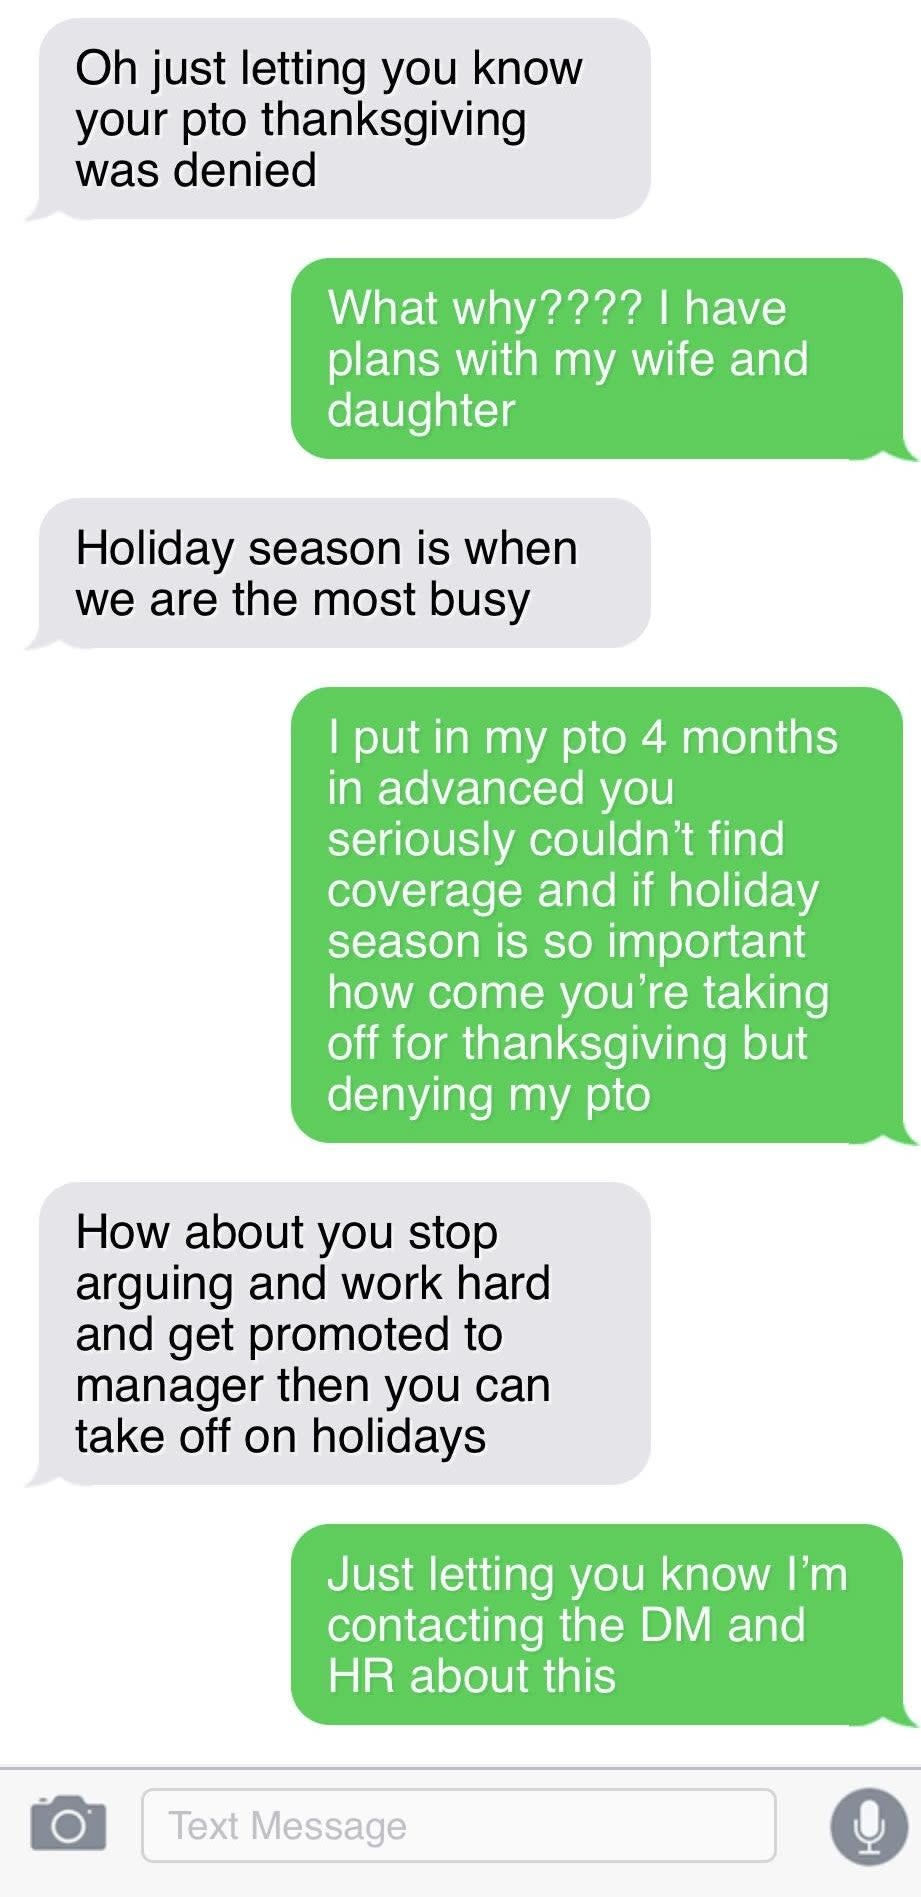 A boss' text message saying that an employee's PTO has been denied over thanksgiving, even though the request was submitted four months ago